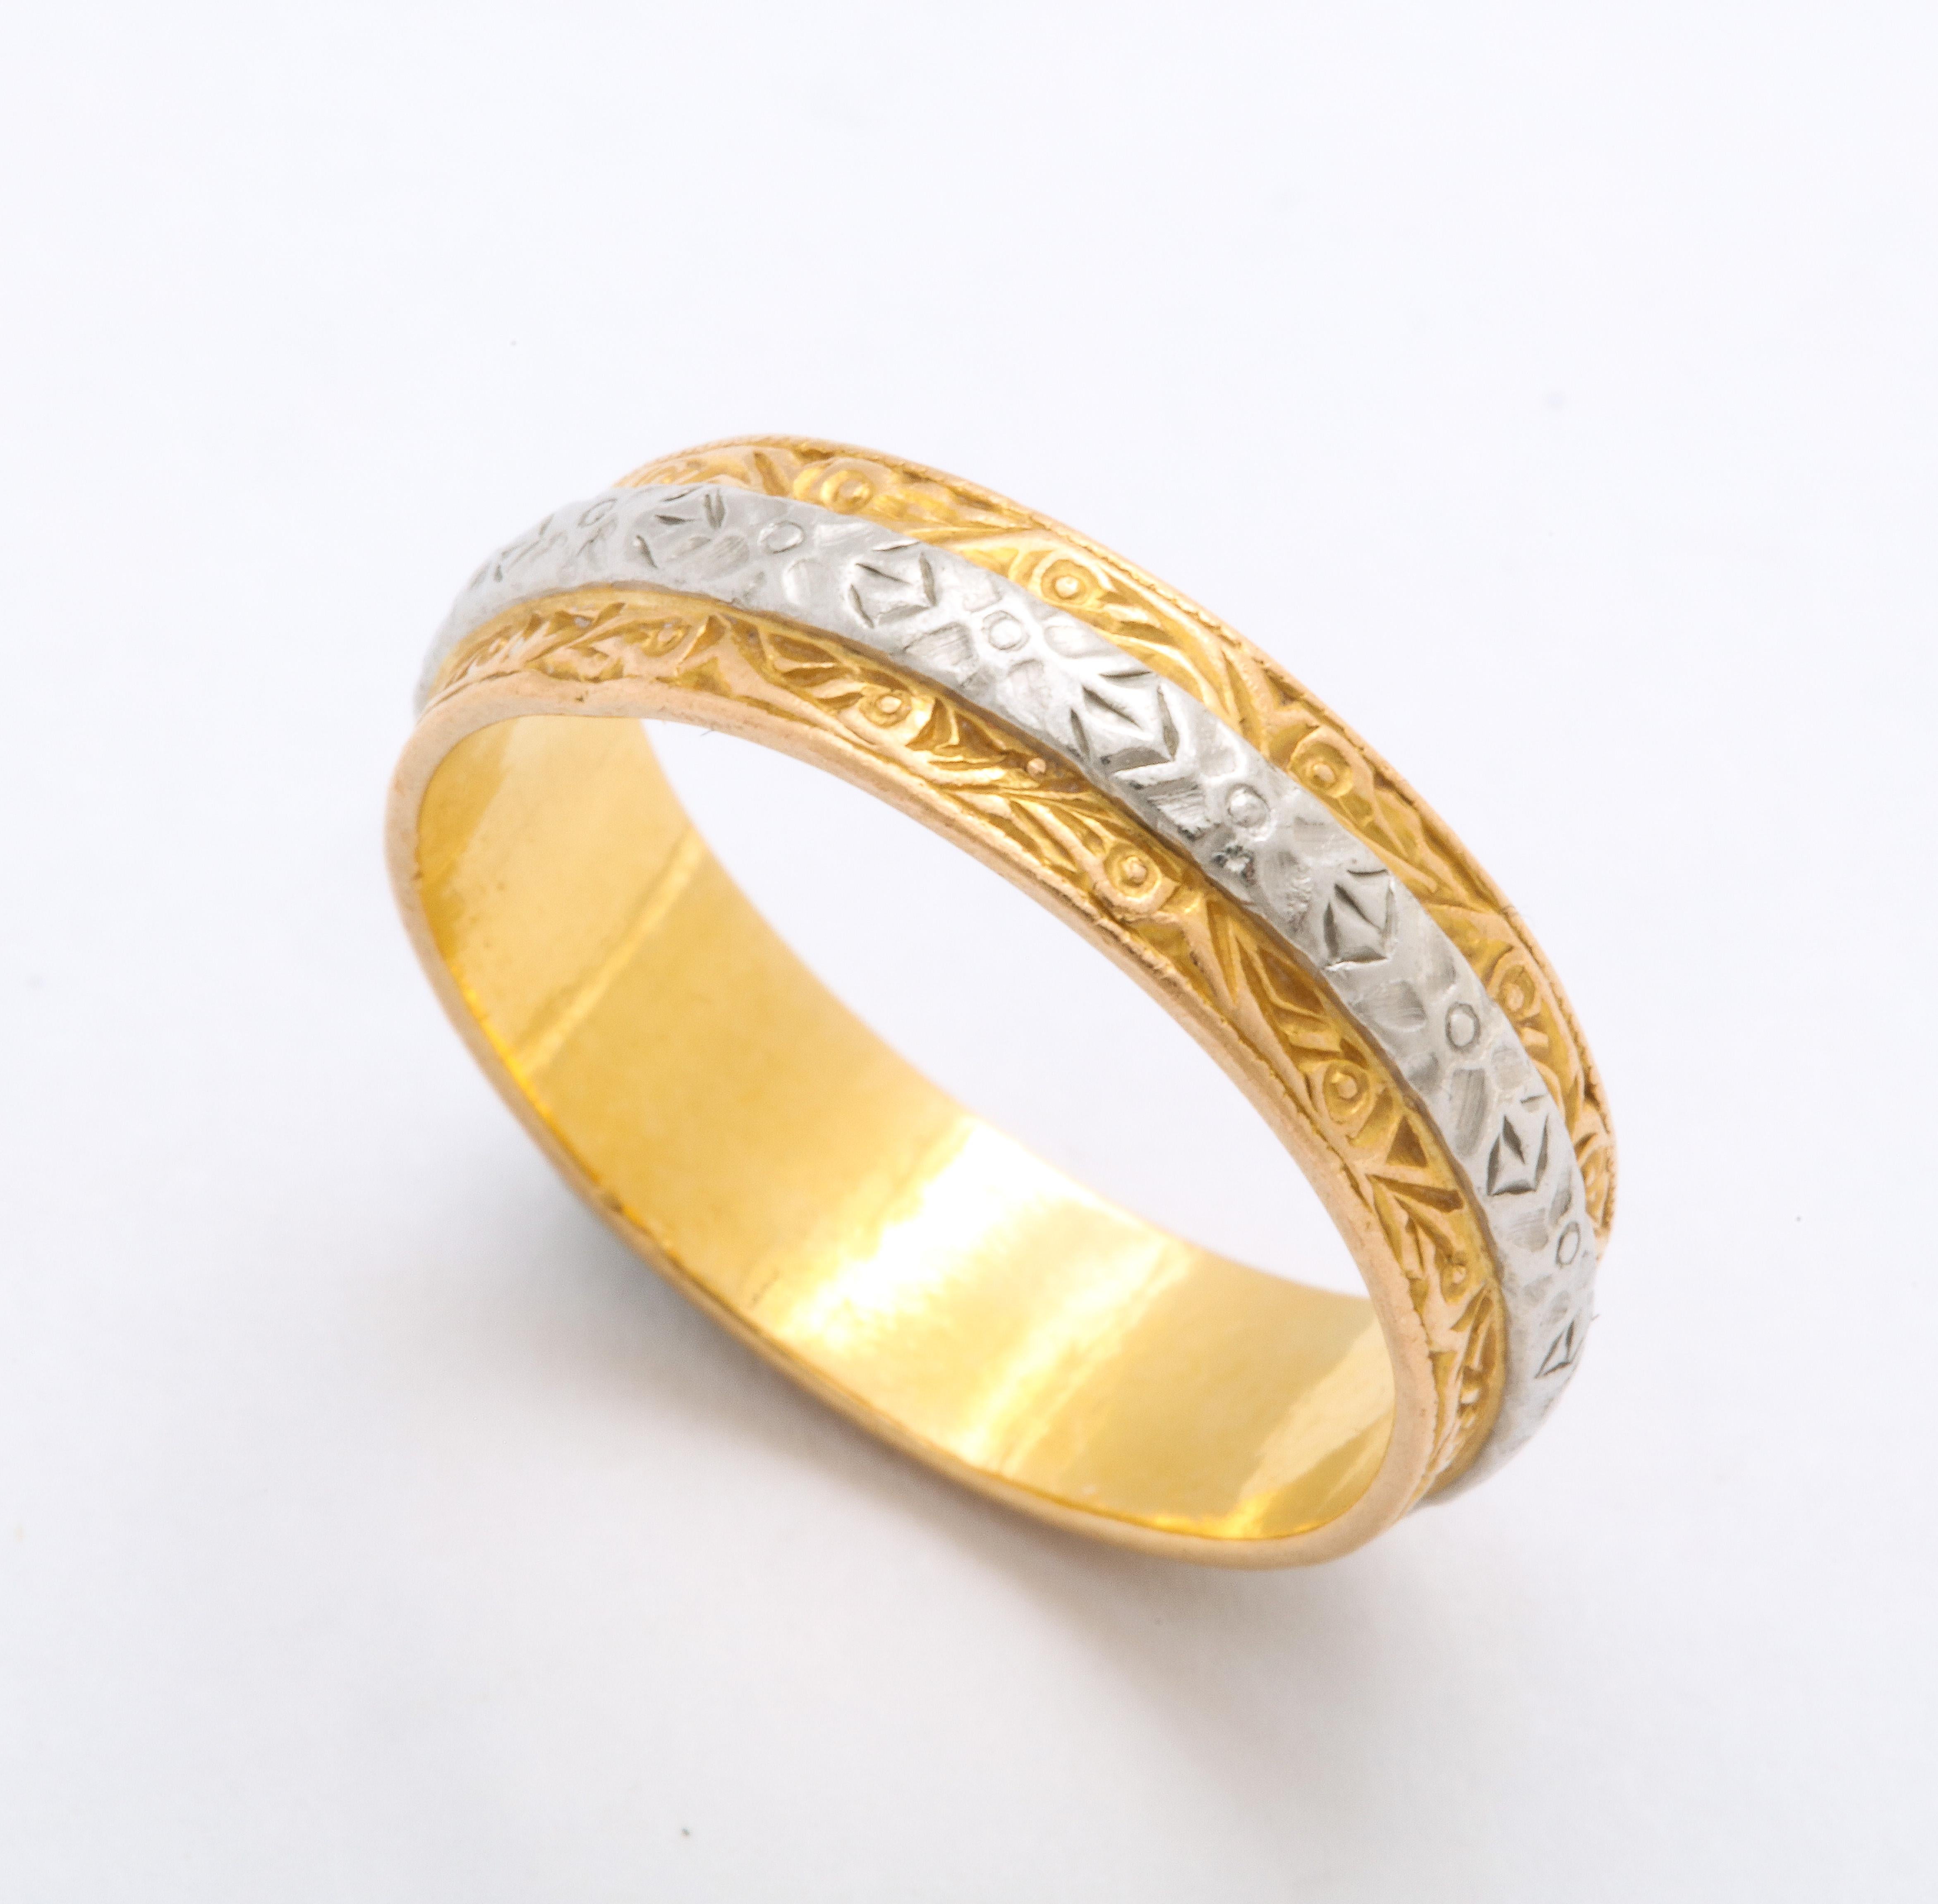 In chased 22 Kt gold with a platinum band around the center, this ring, by Charles Green and Son is as elegant, simple, and comfortable on the finger. The gold is adorned with scrolls and foliate details. The ring is a delight worn alone or perfect